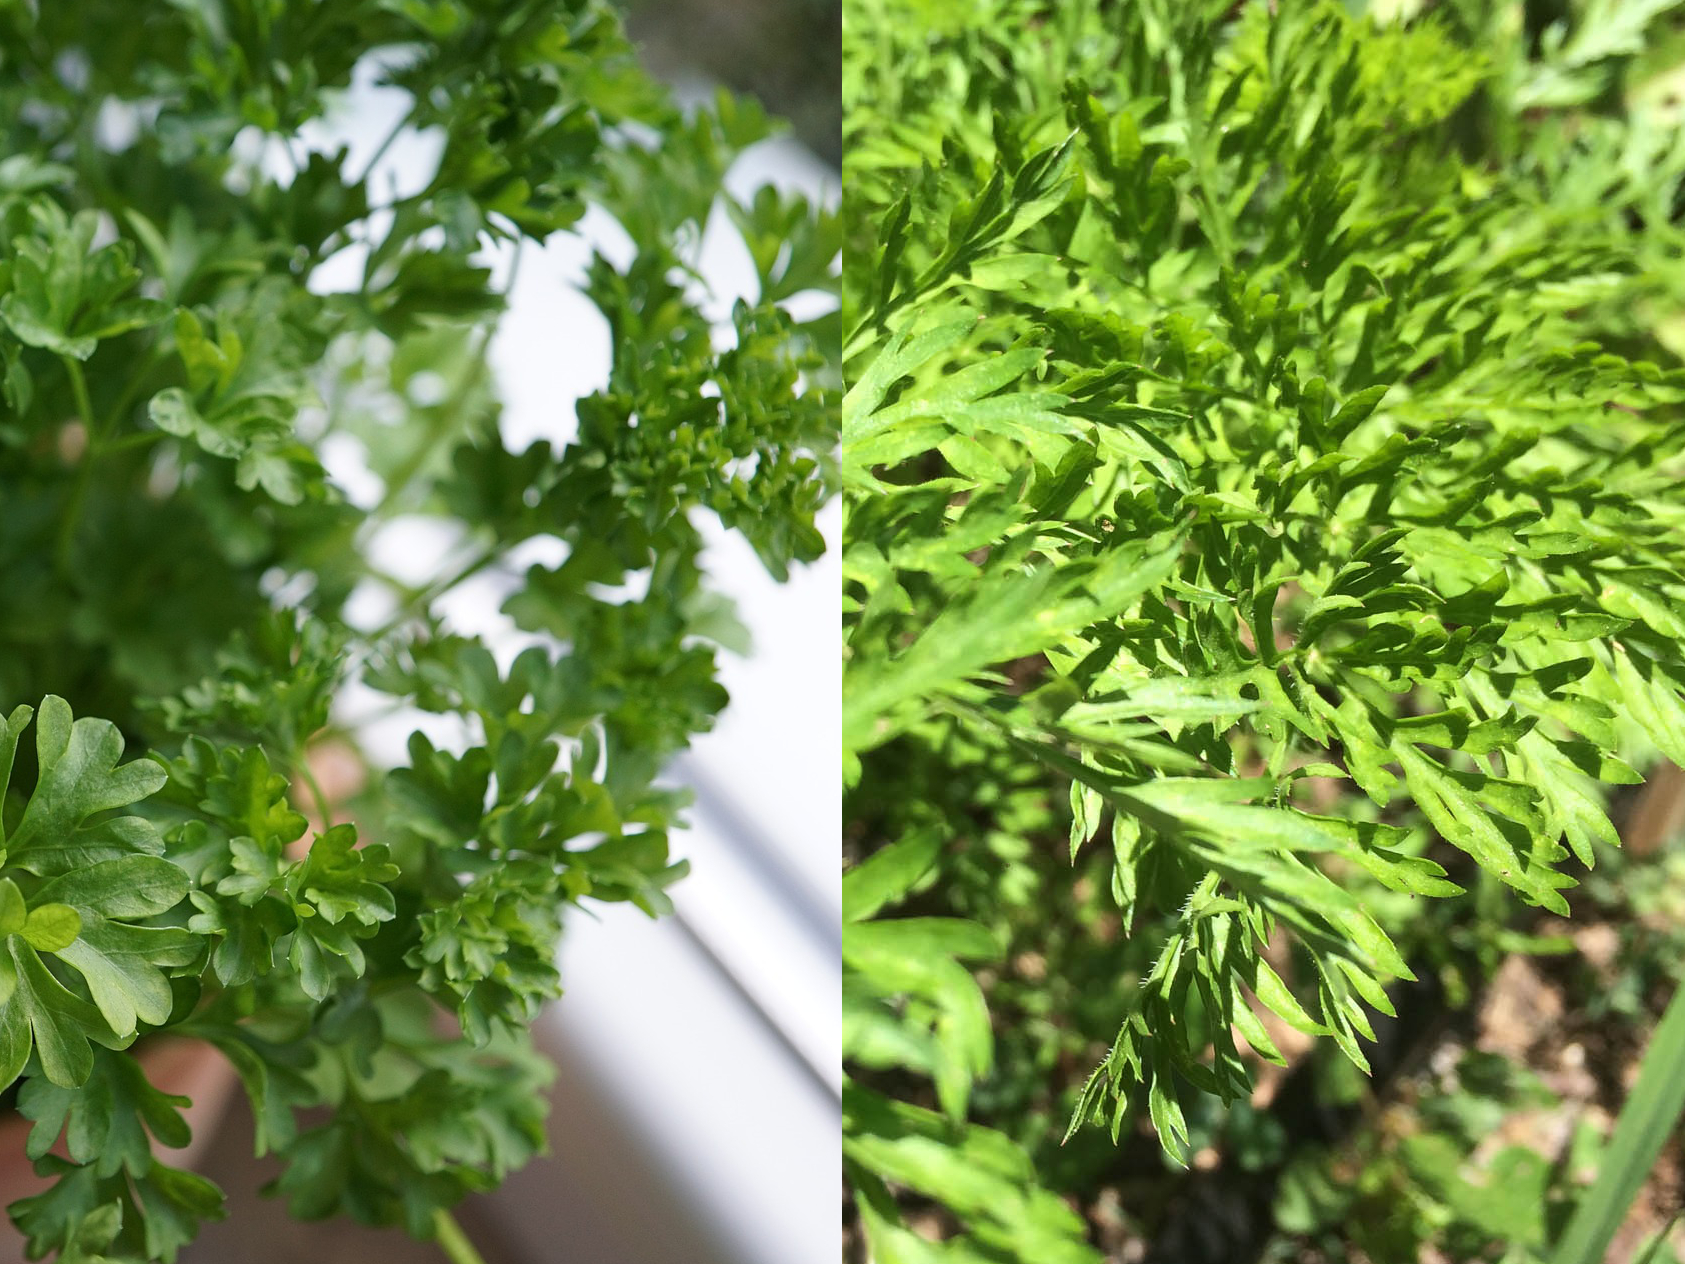 Parsley and carrots